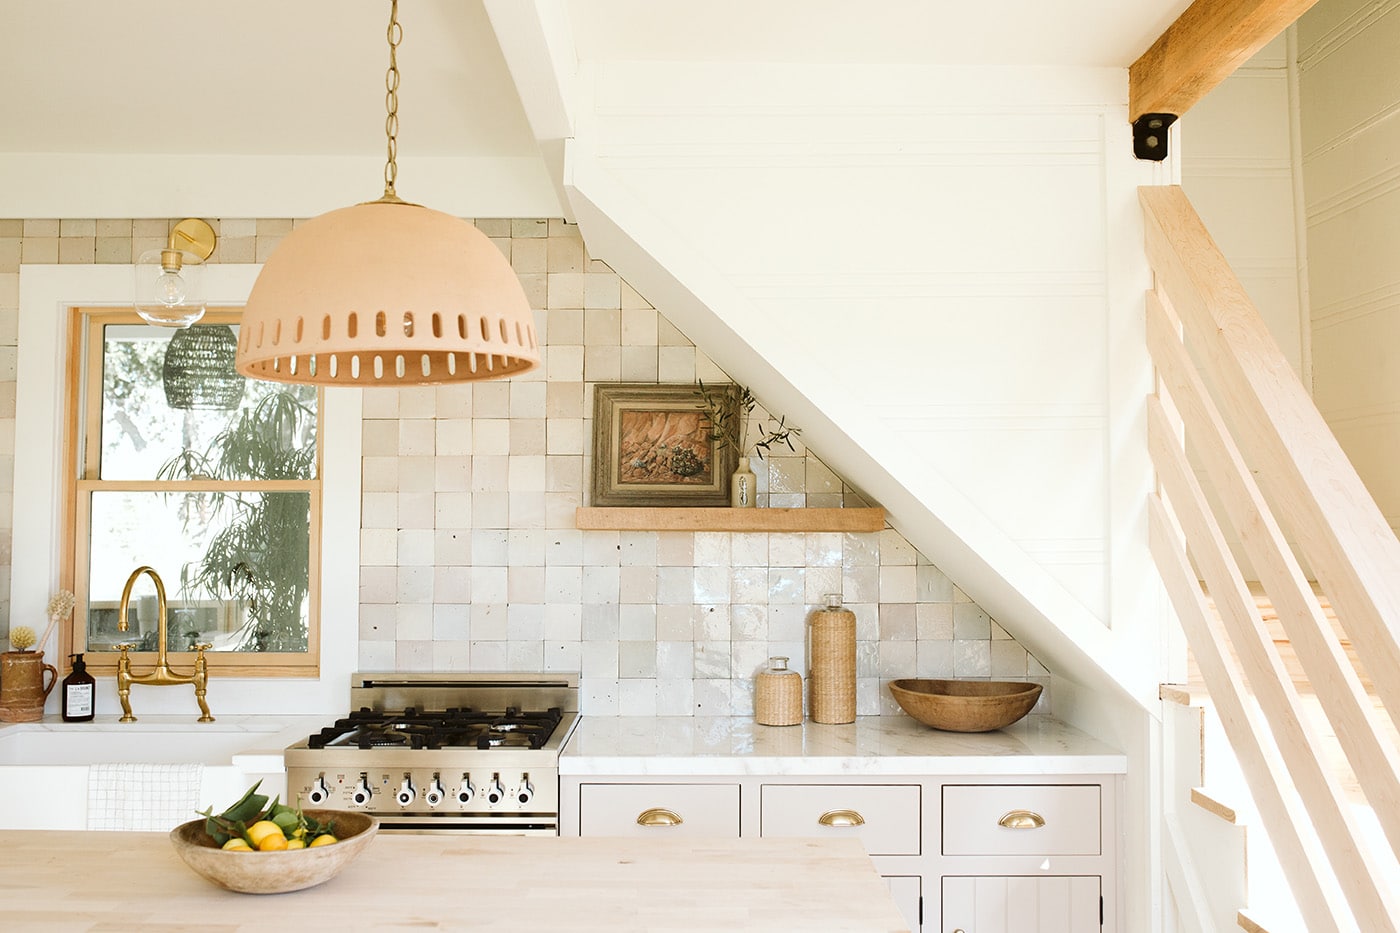 natural textures and zellige tile in this small kitchen | bodega house los alamos on coco kelley